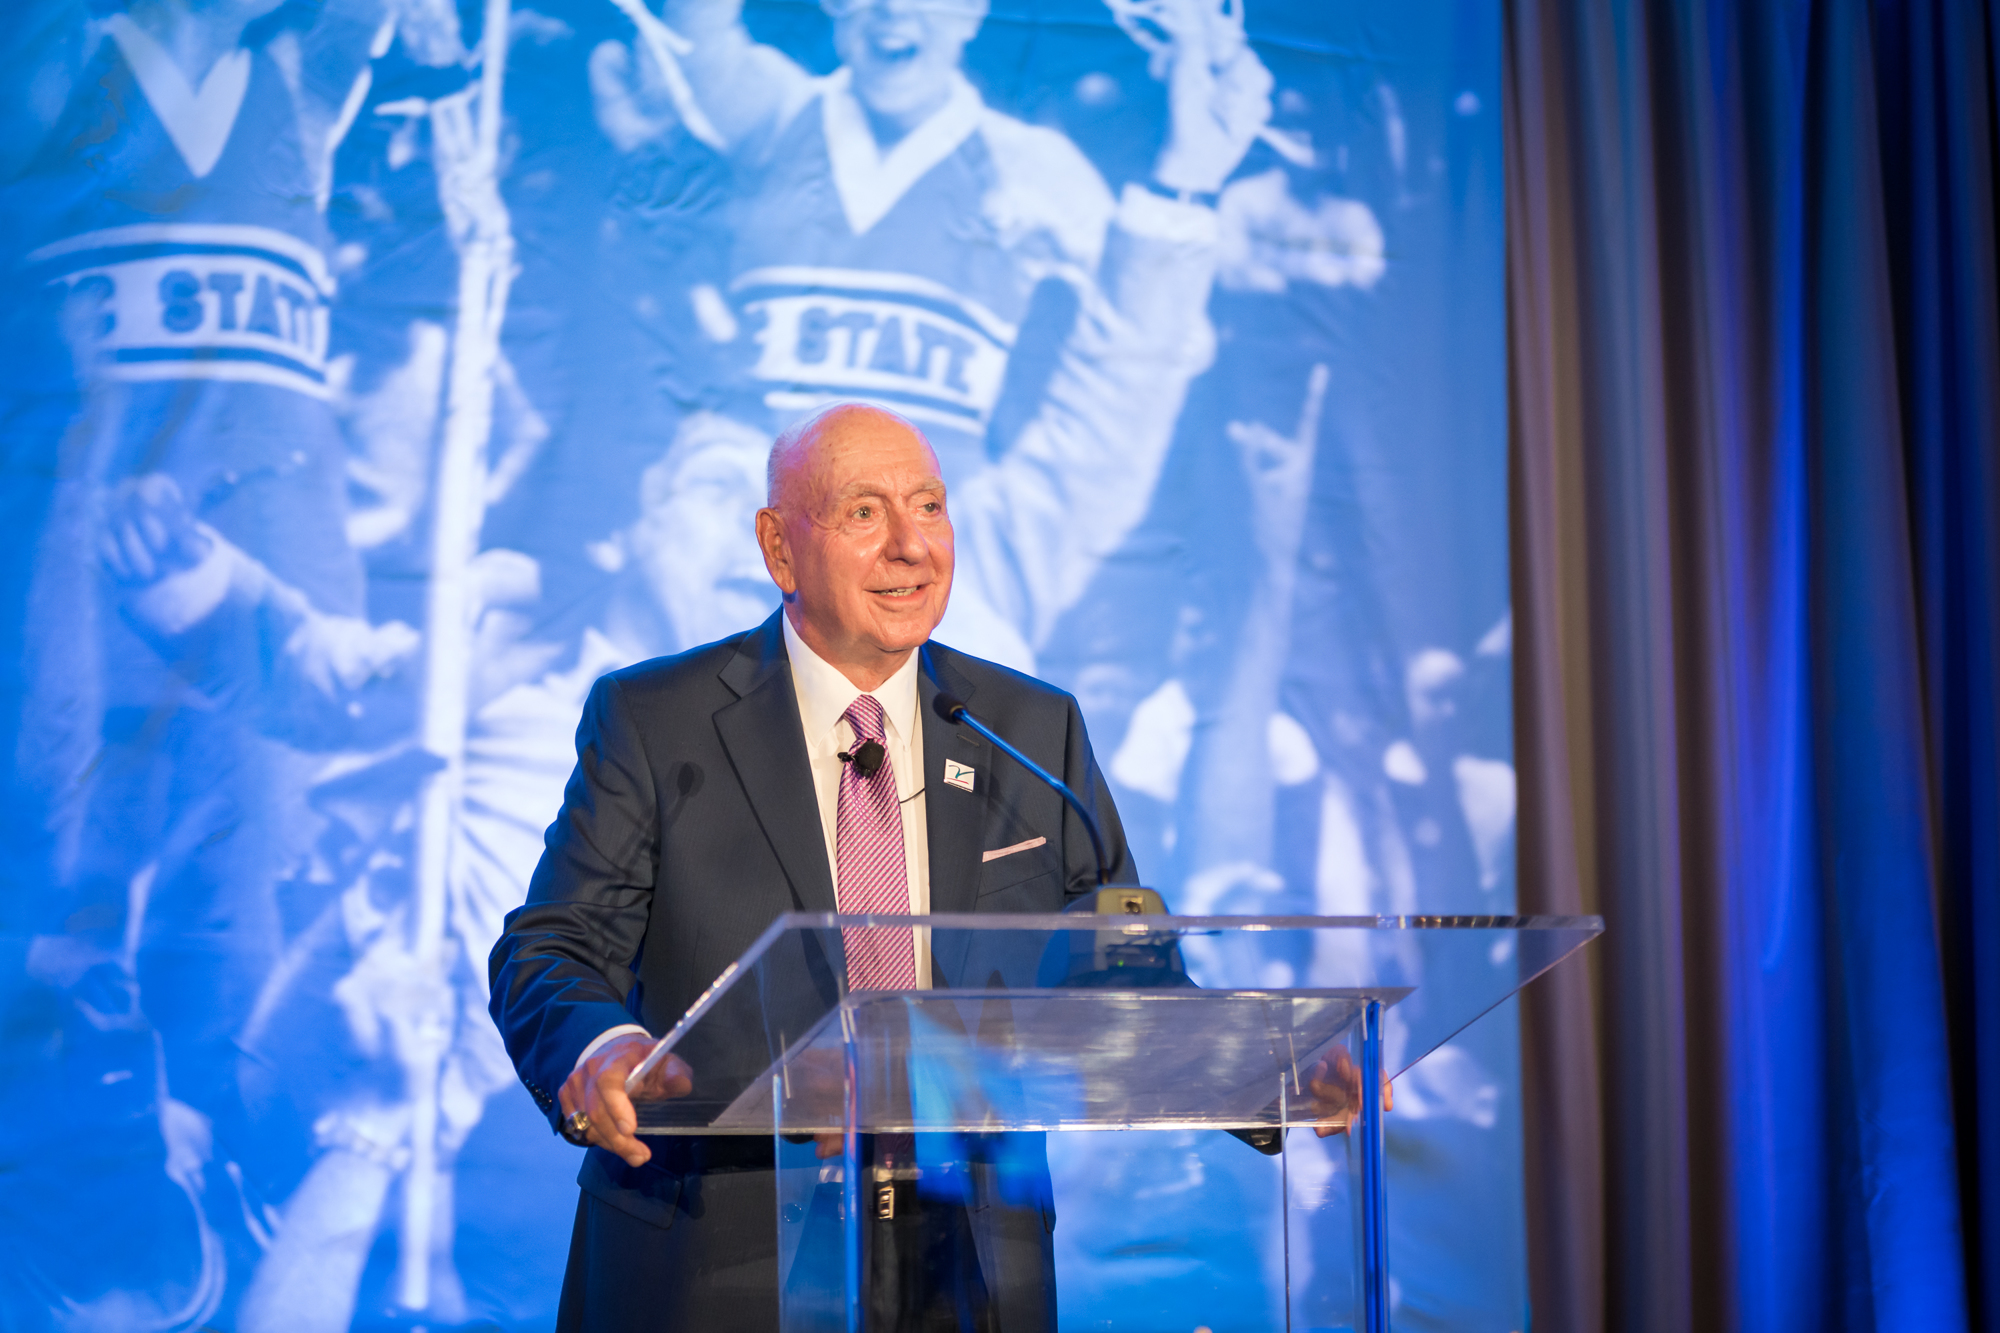 Dick Vitale has decided to postpone the 2020 Dick Vitale Gala until Spetember 4. Photo courtesy The V Foundation for Cancer Research.